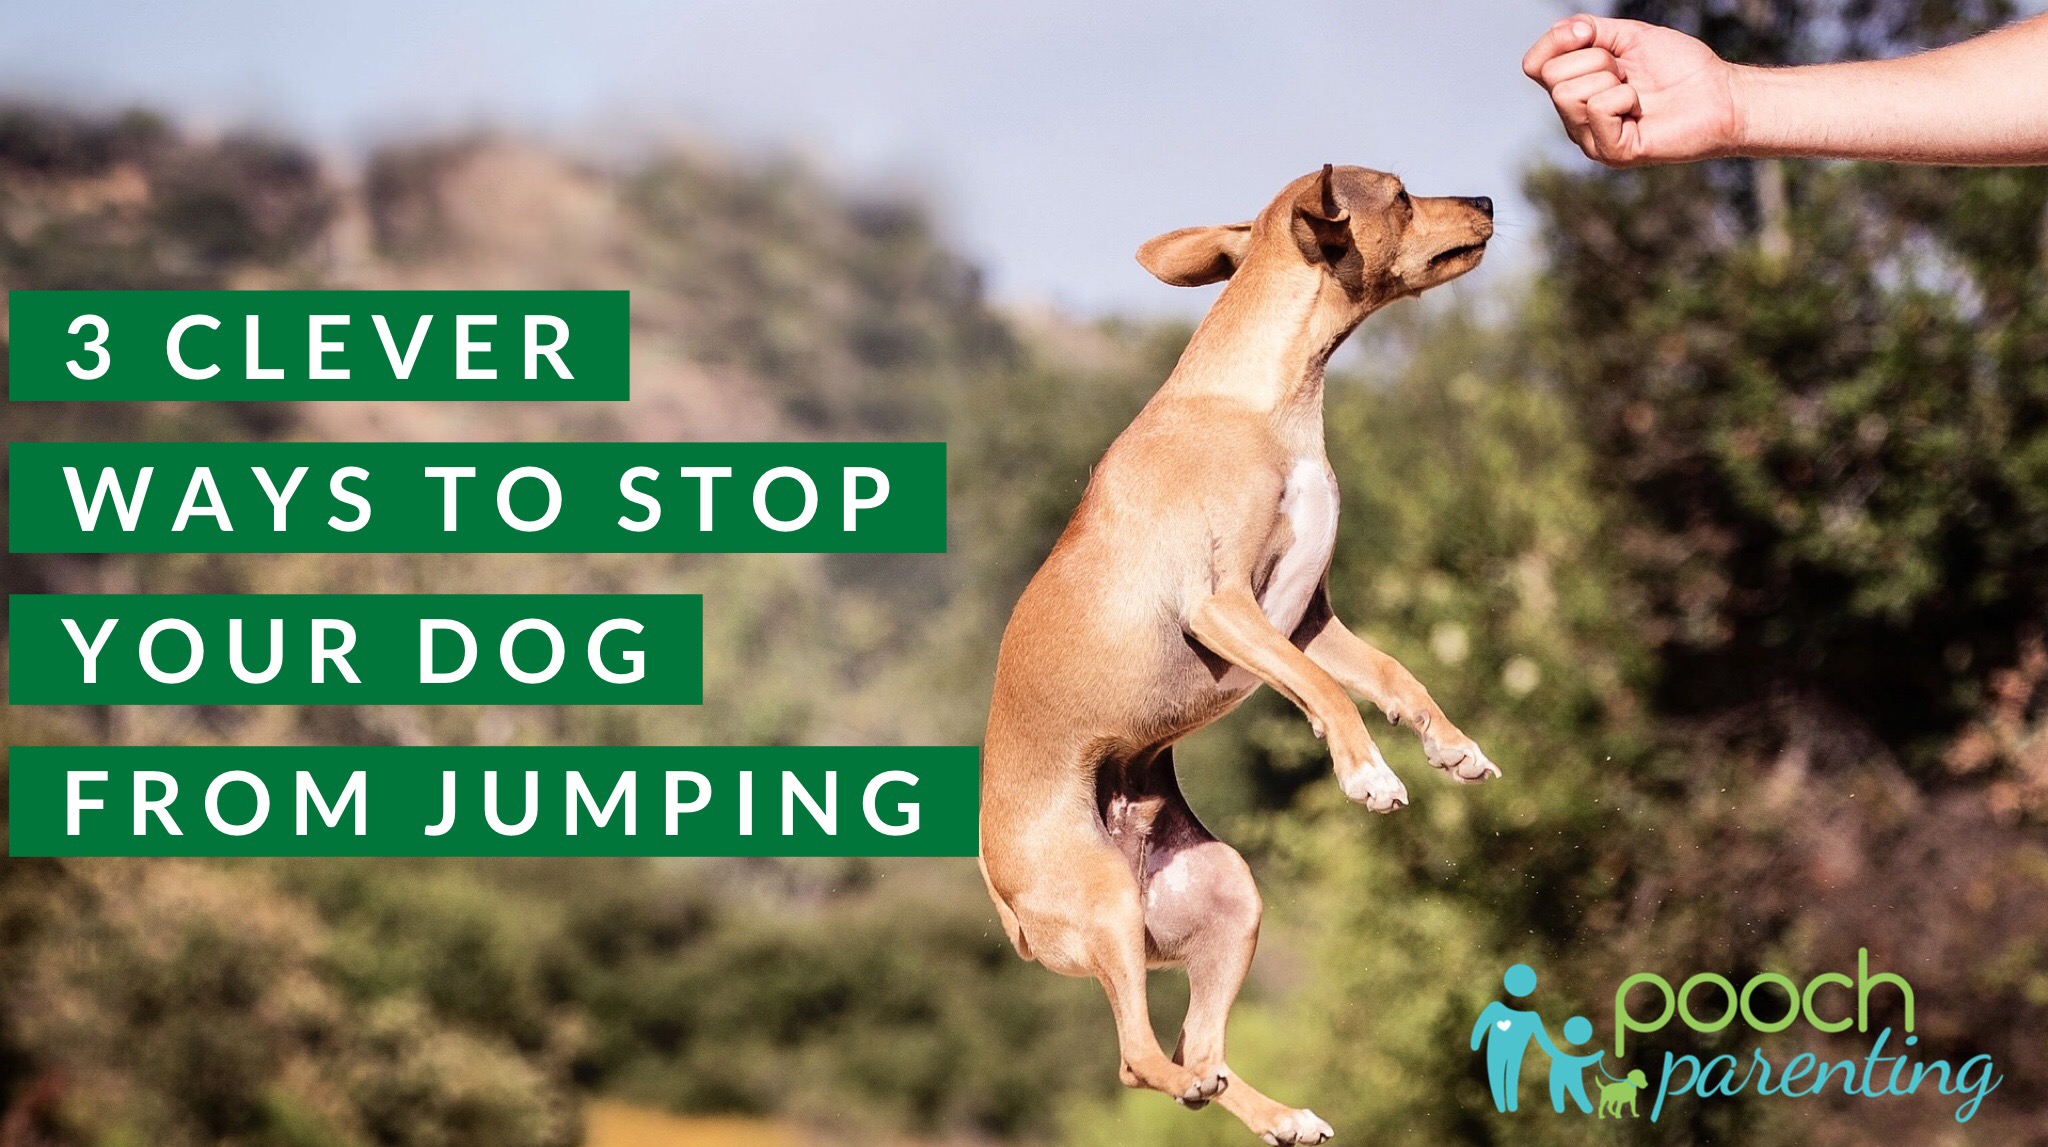 Dog is jumping. Dog Jumps up. How to stop a Dog from jumping. How to stop a Dog from jumping up on you. My dog can jump